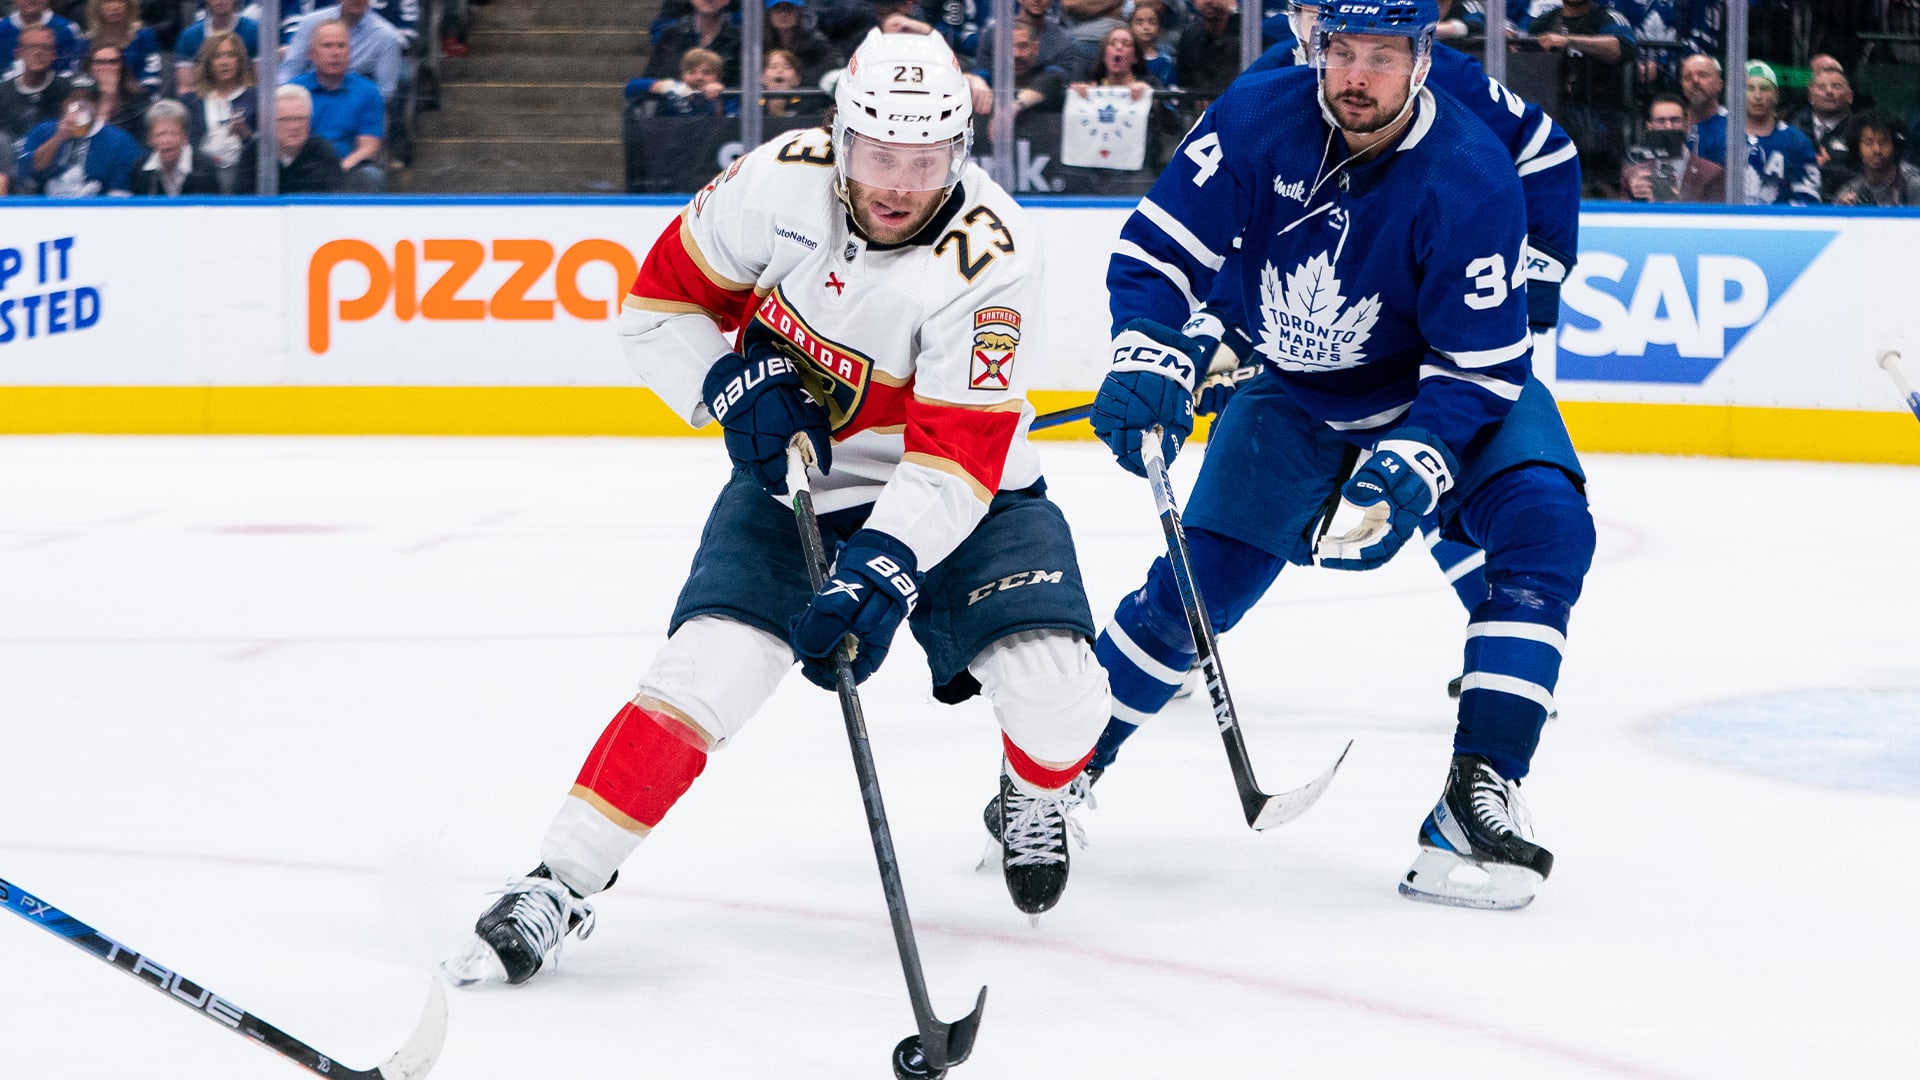 Toronto Maple Leafs vs Florida Panthers - March 23, 2023